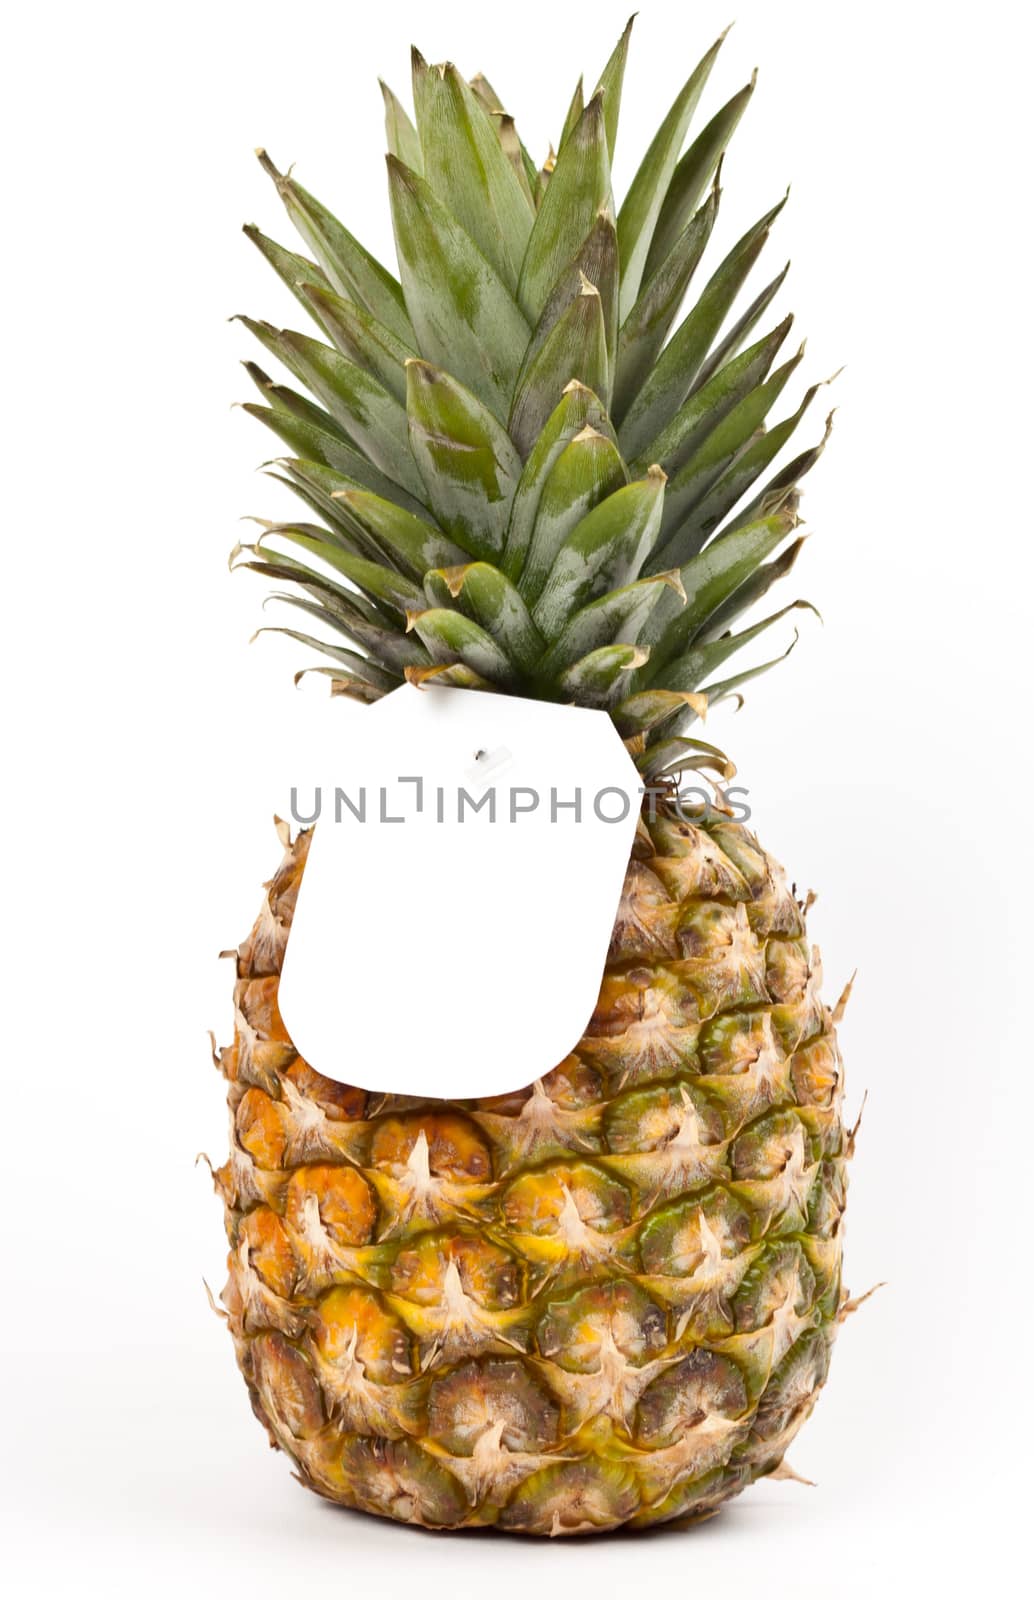 ripe pineapple with a price tag by aziatik13